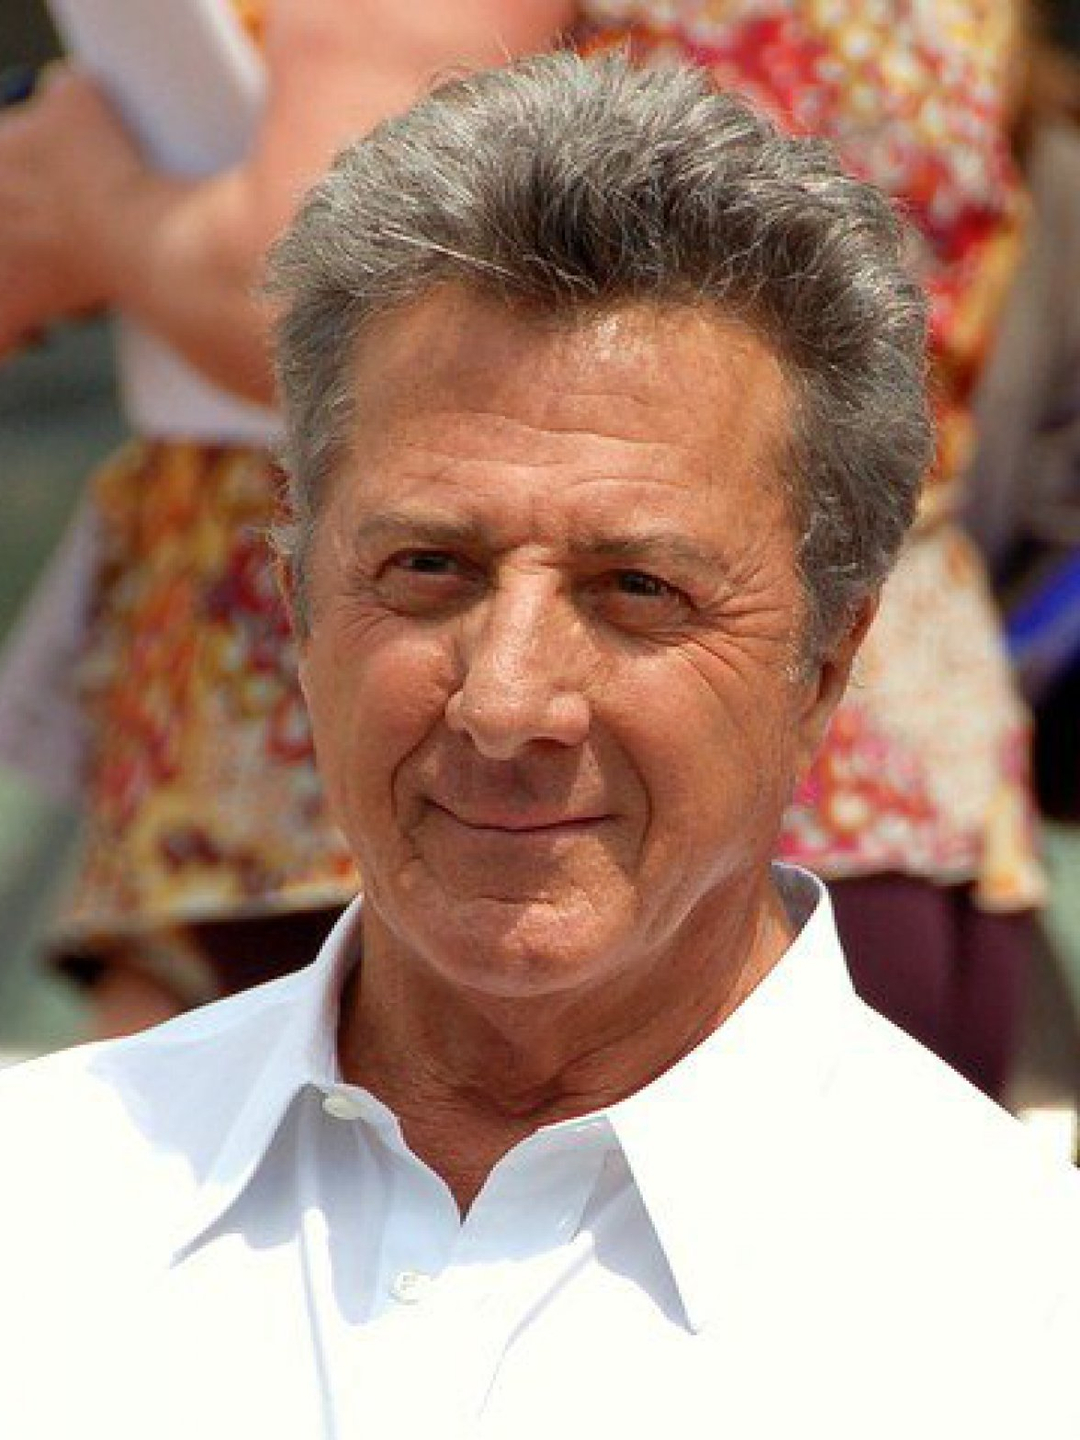 Dustin Hoffman where is he now